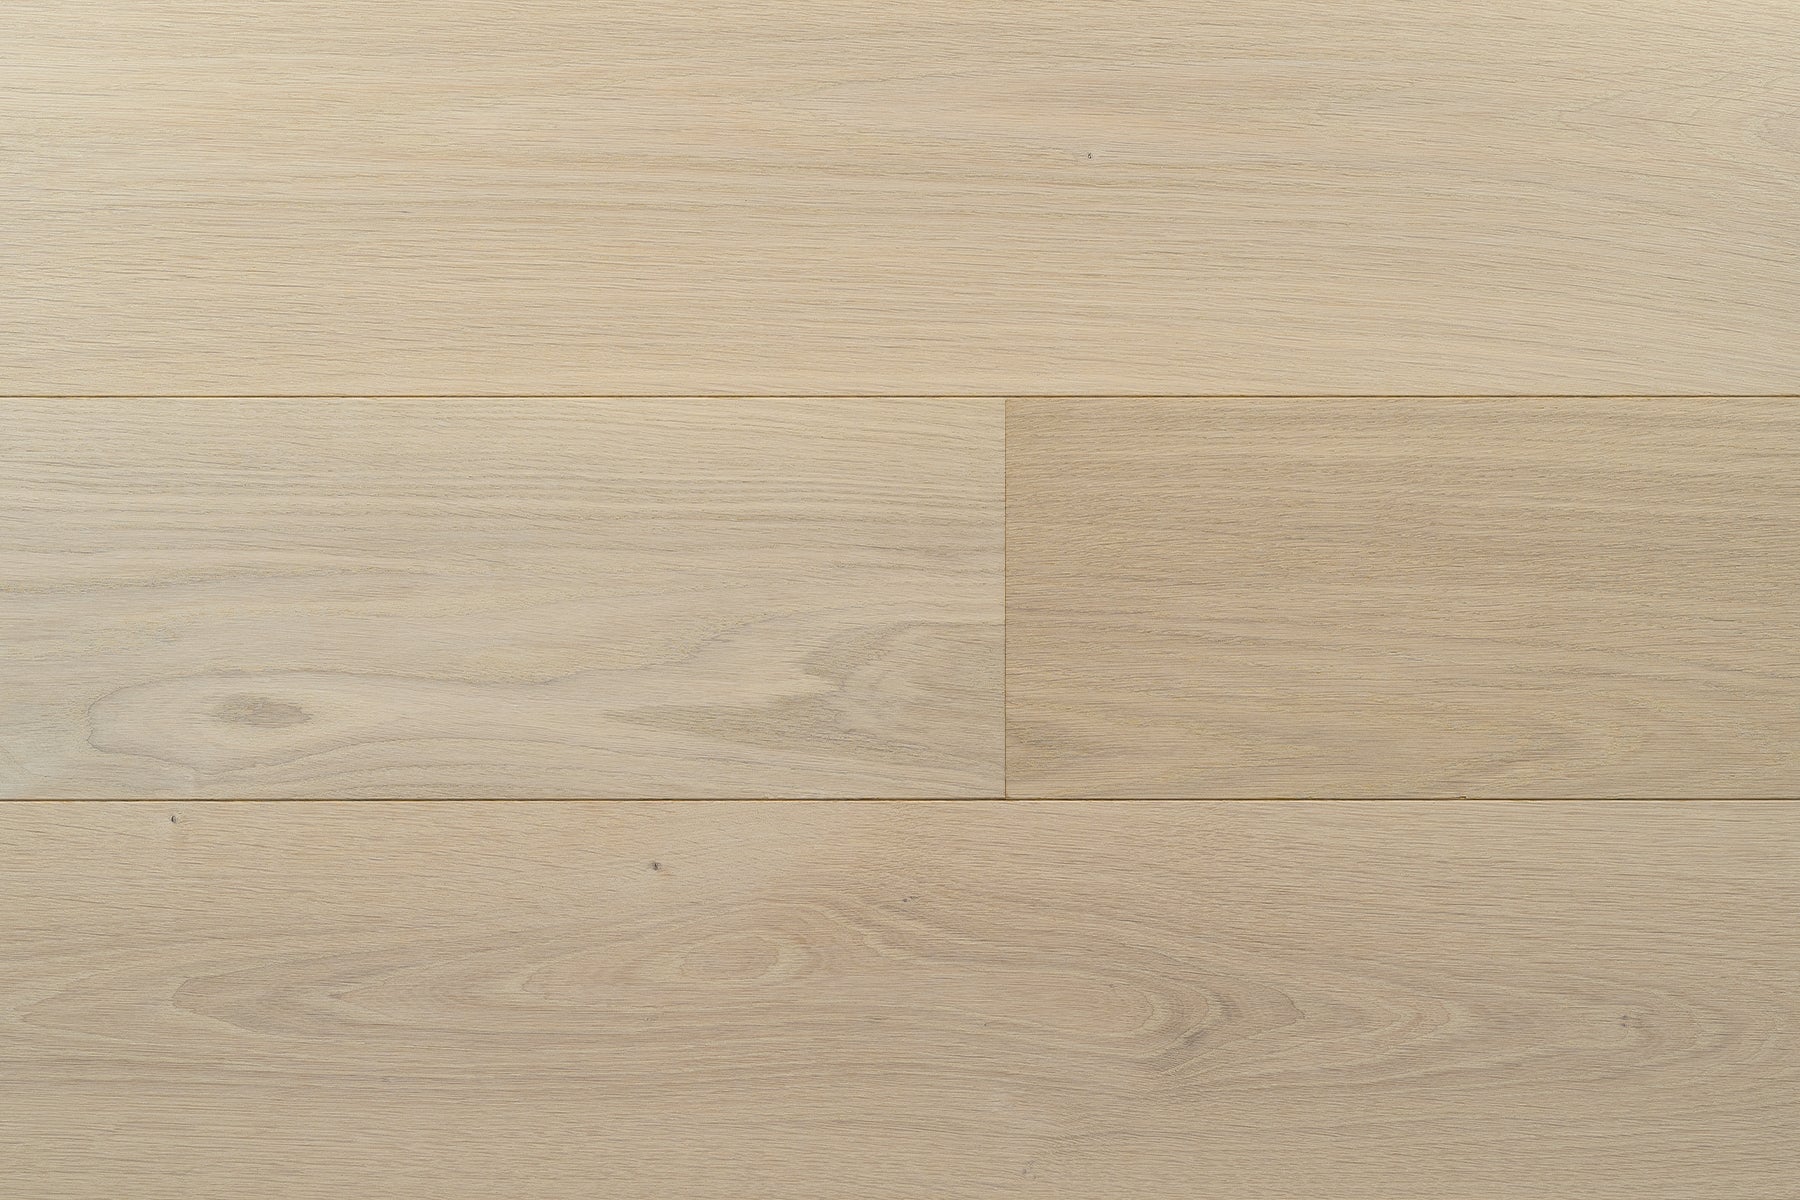 Hardwood Canada Wide Plank Collection Engineered White Oak